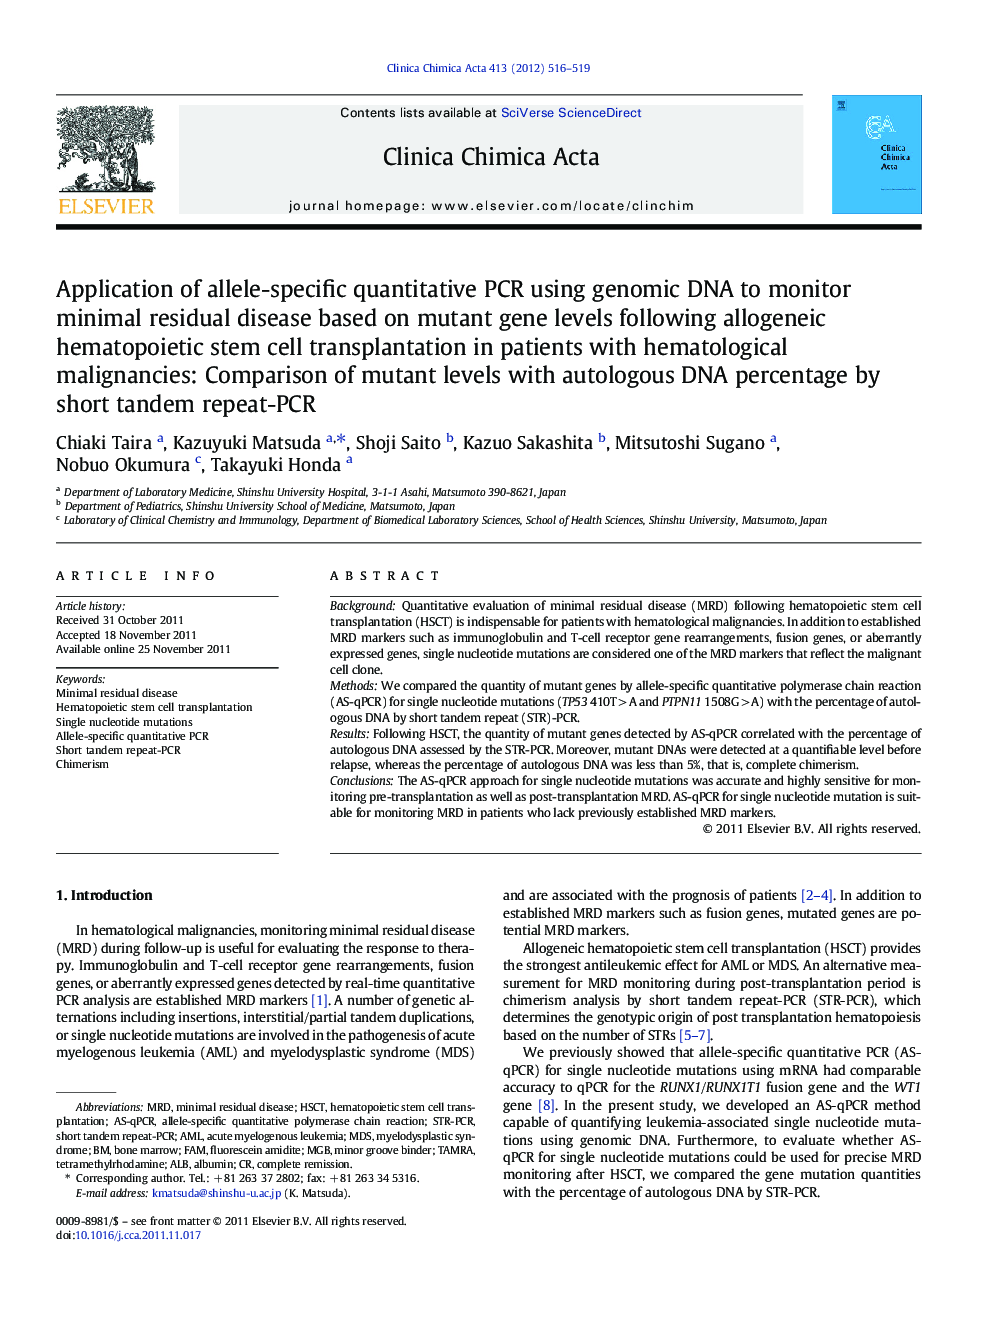 Application of allele-specific quantitative PCR using genomic DNA to monitor minimal residual disease based on mutant gene levels following allogeneic hematopoietic stem cell transplantation in patients with hematological malignancies: Comparison of mutan